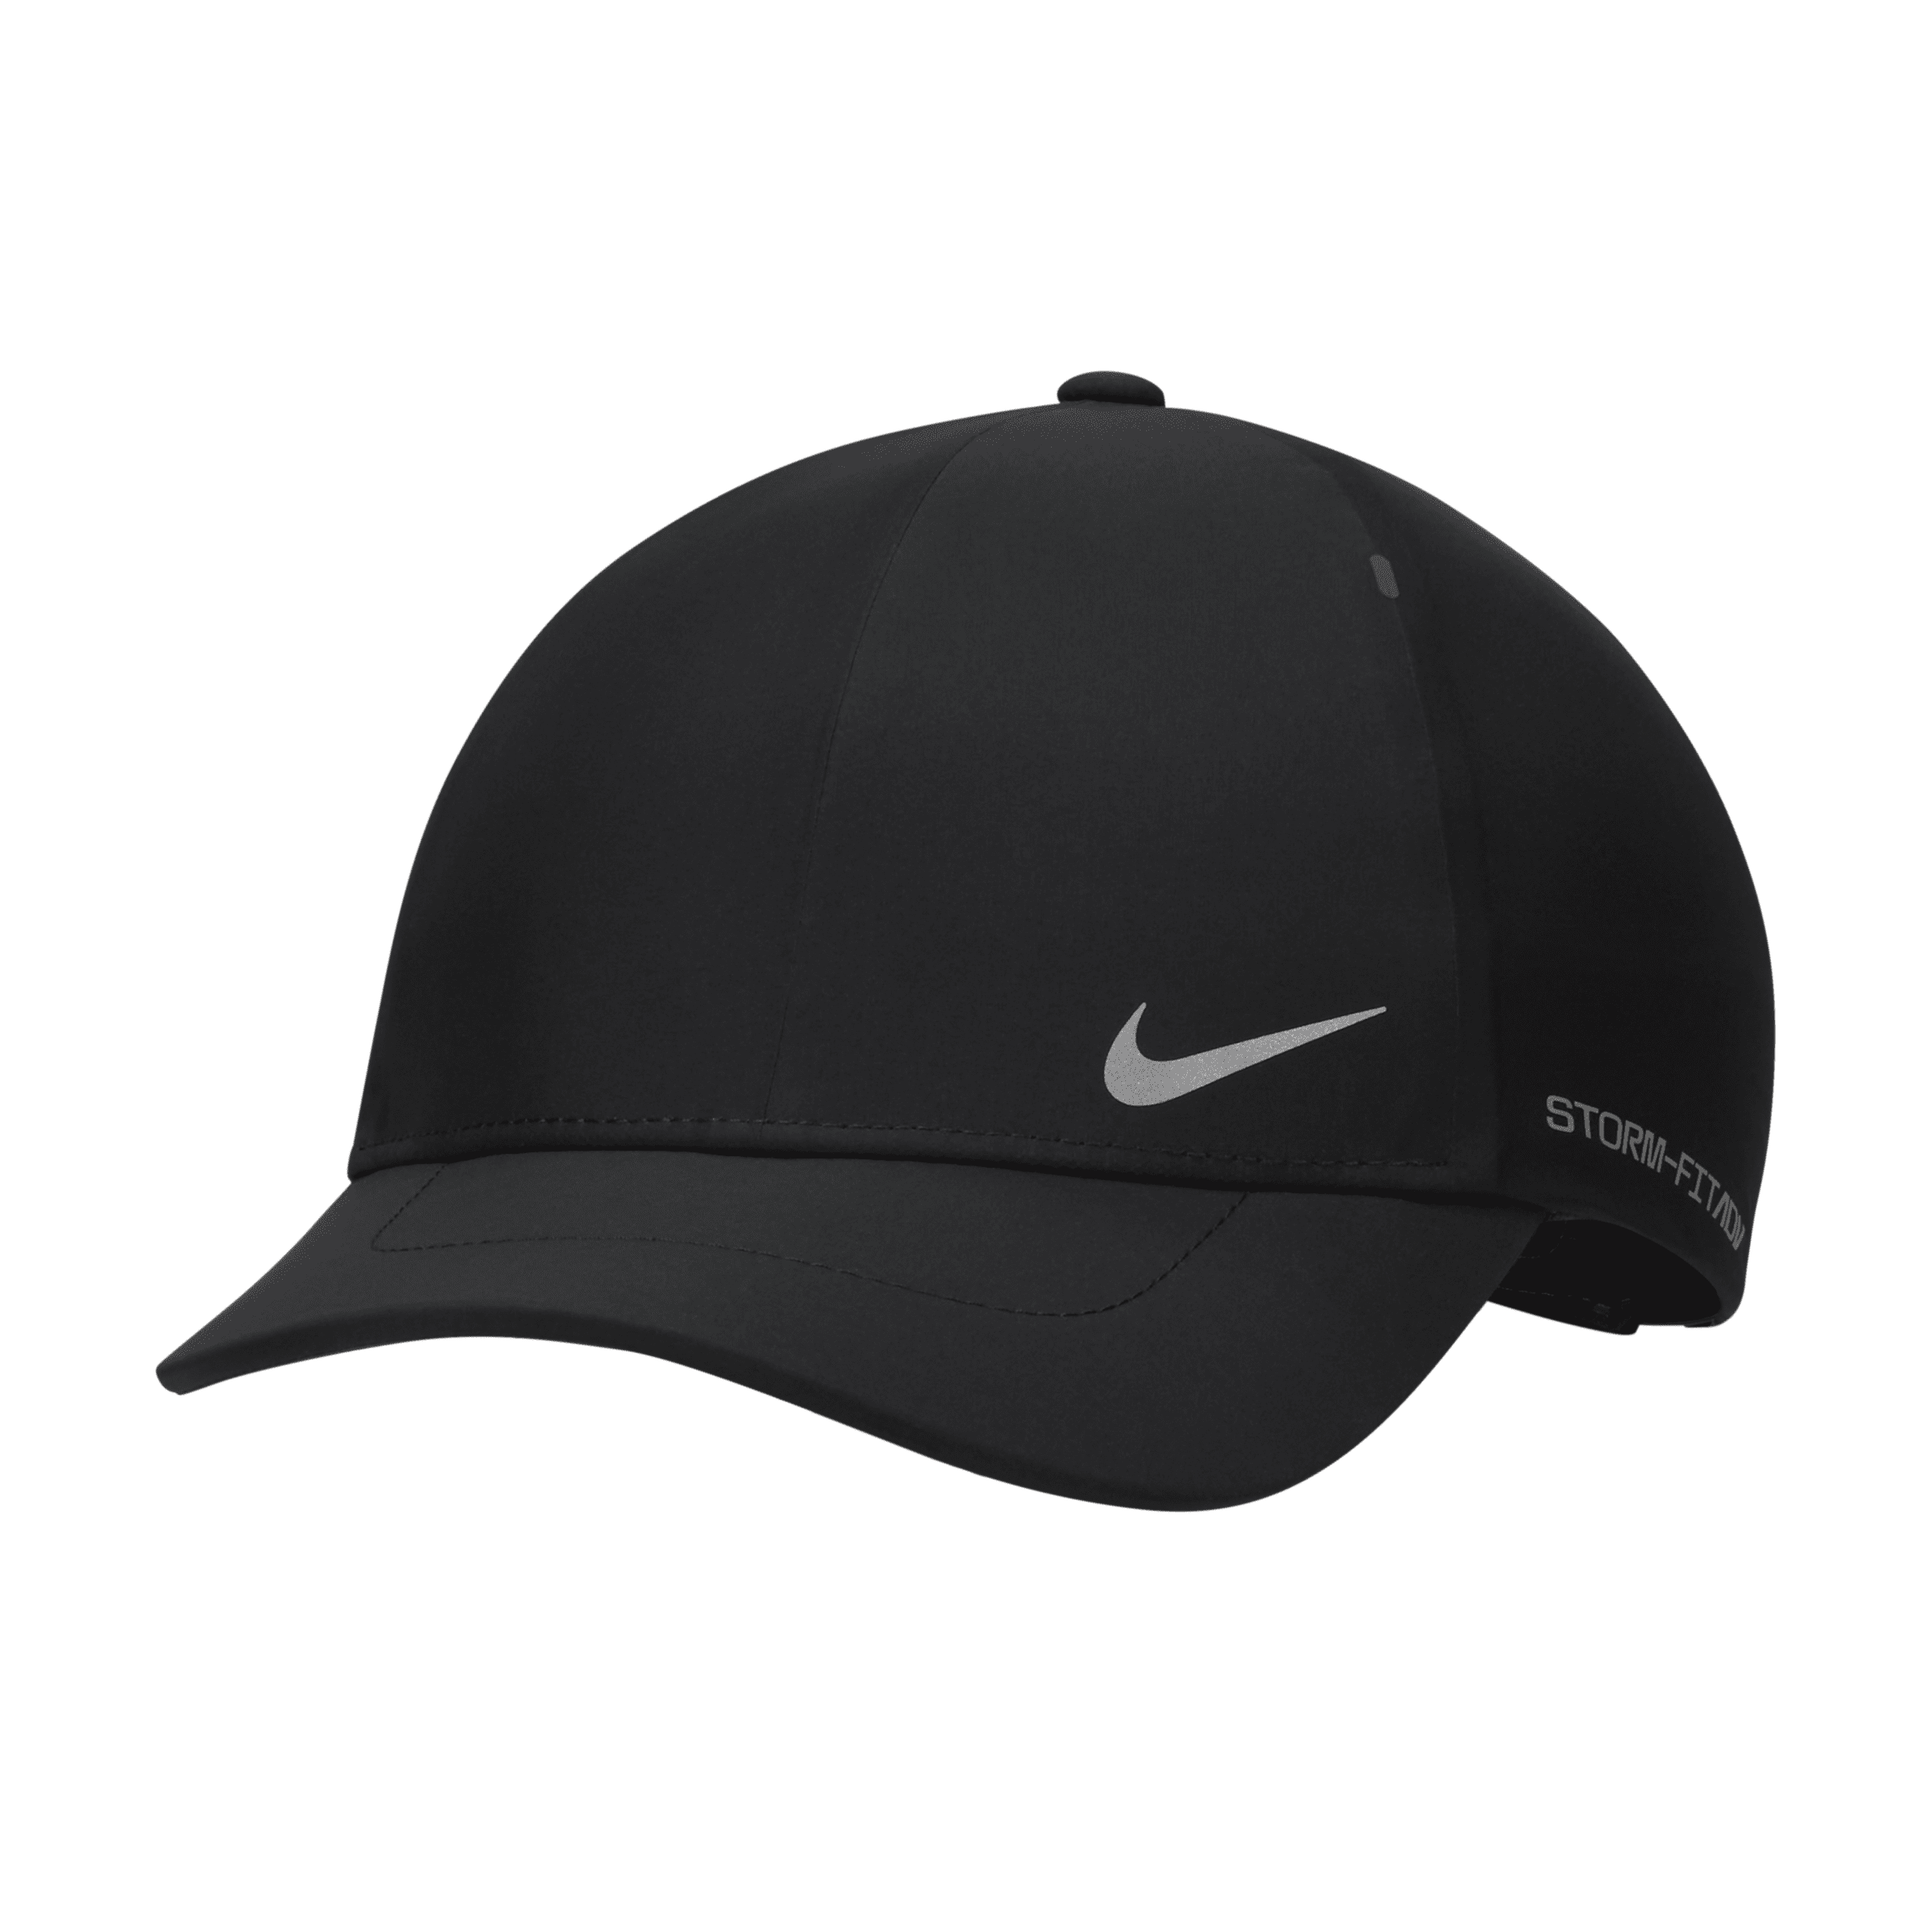 Nike Unisex Storm-fit Adv Club Structured Aerobill Cap In Black